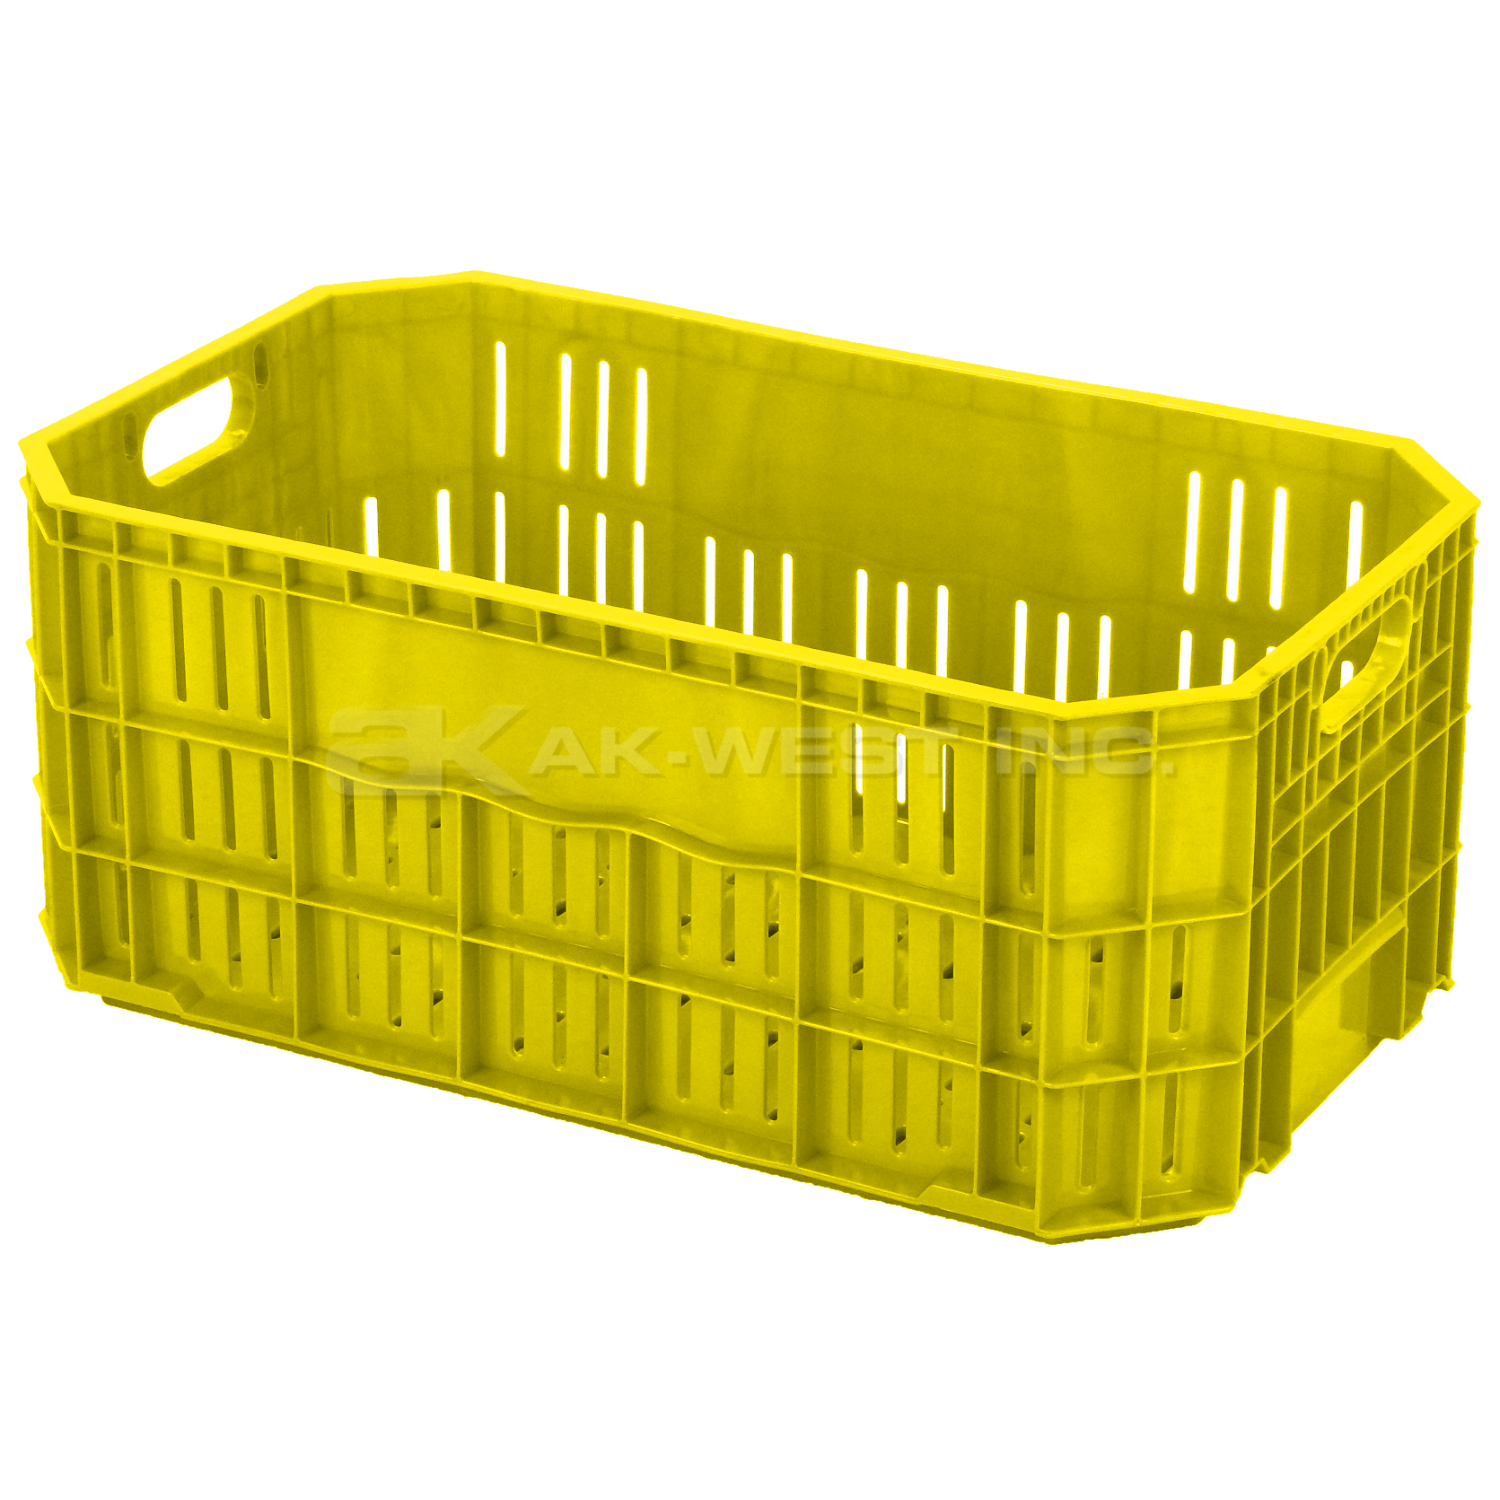 Yellow, 20"L x 12"W x 8"H Vented Handsfree Crate